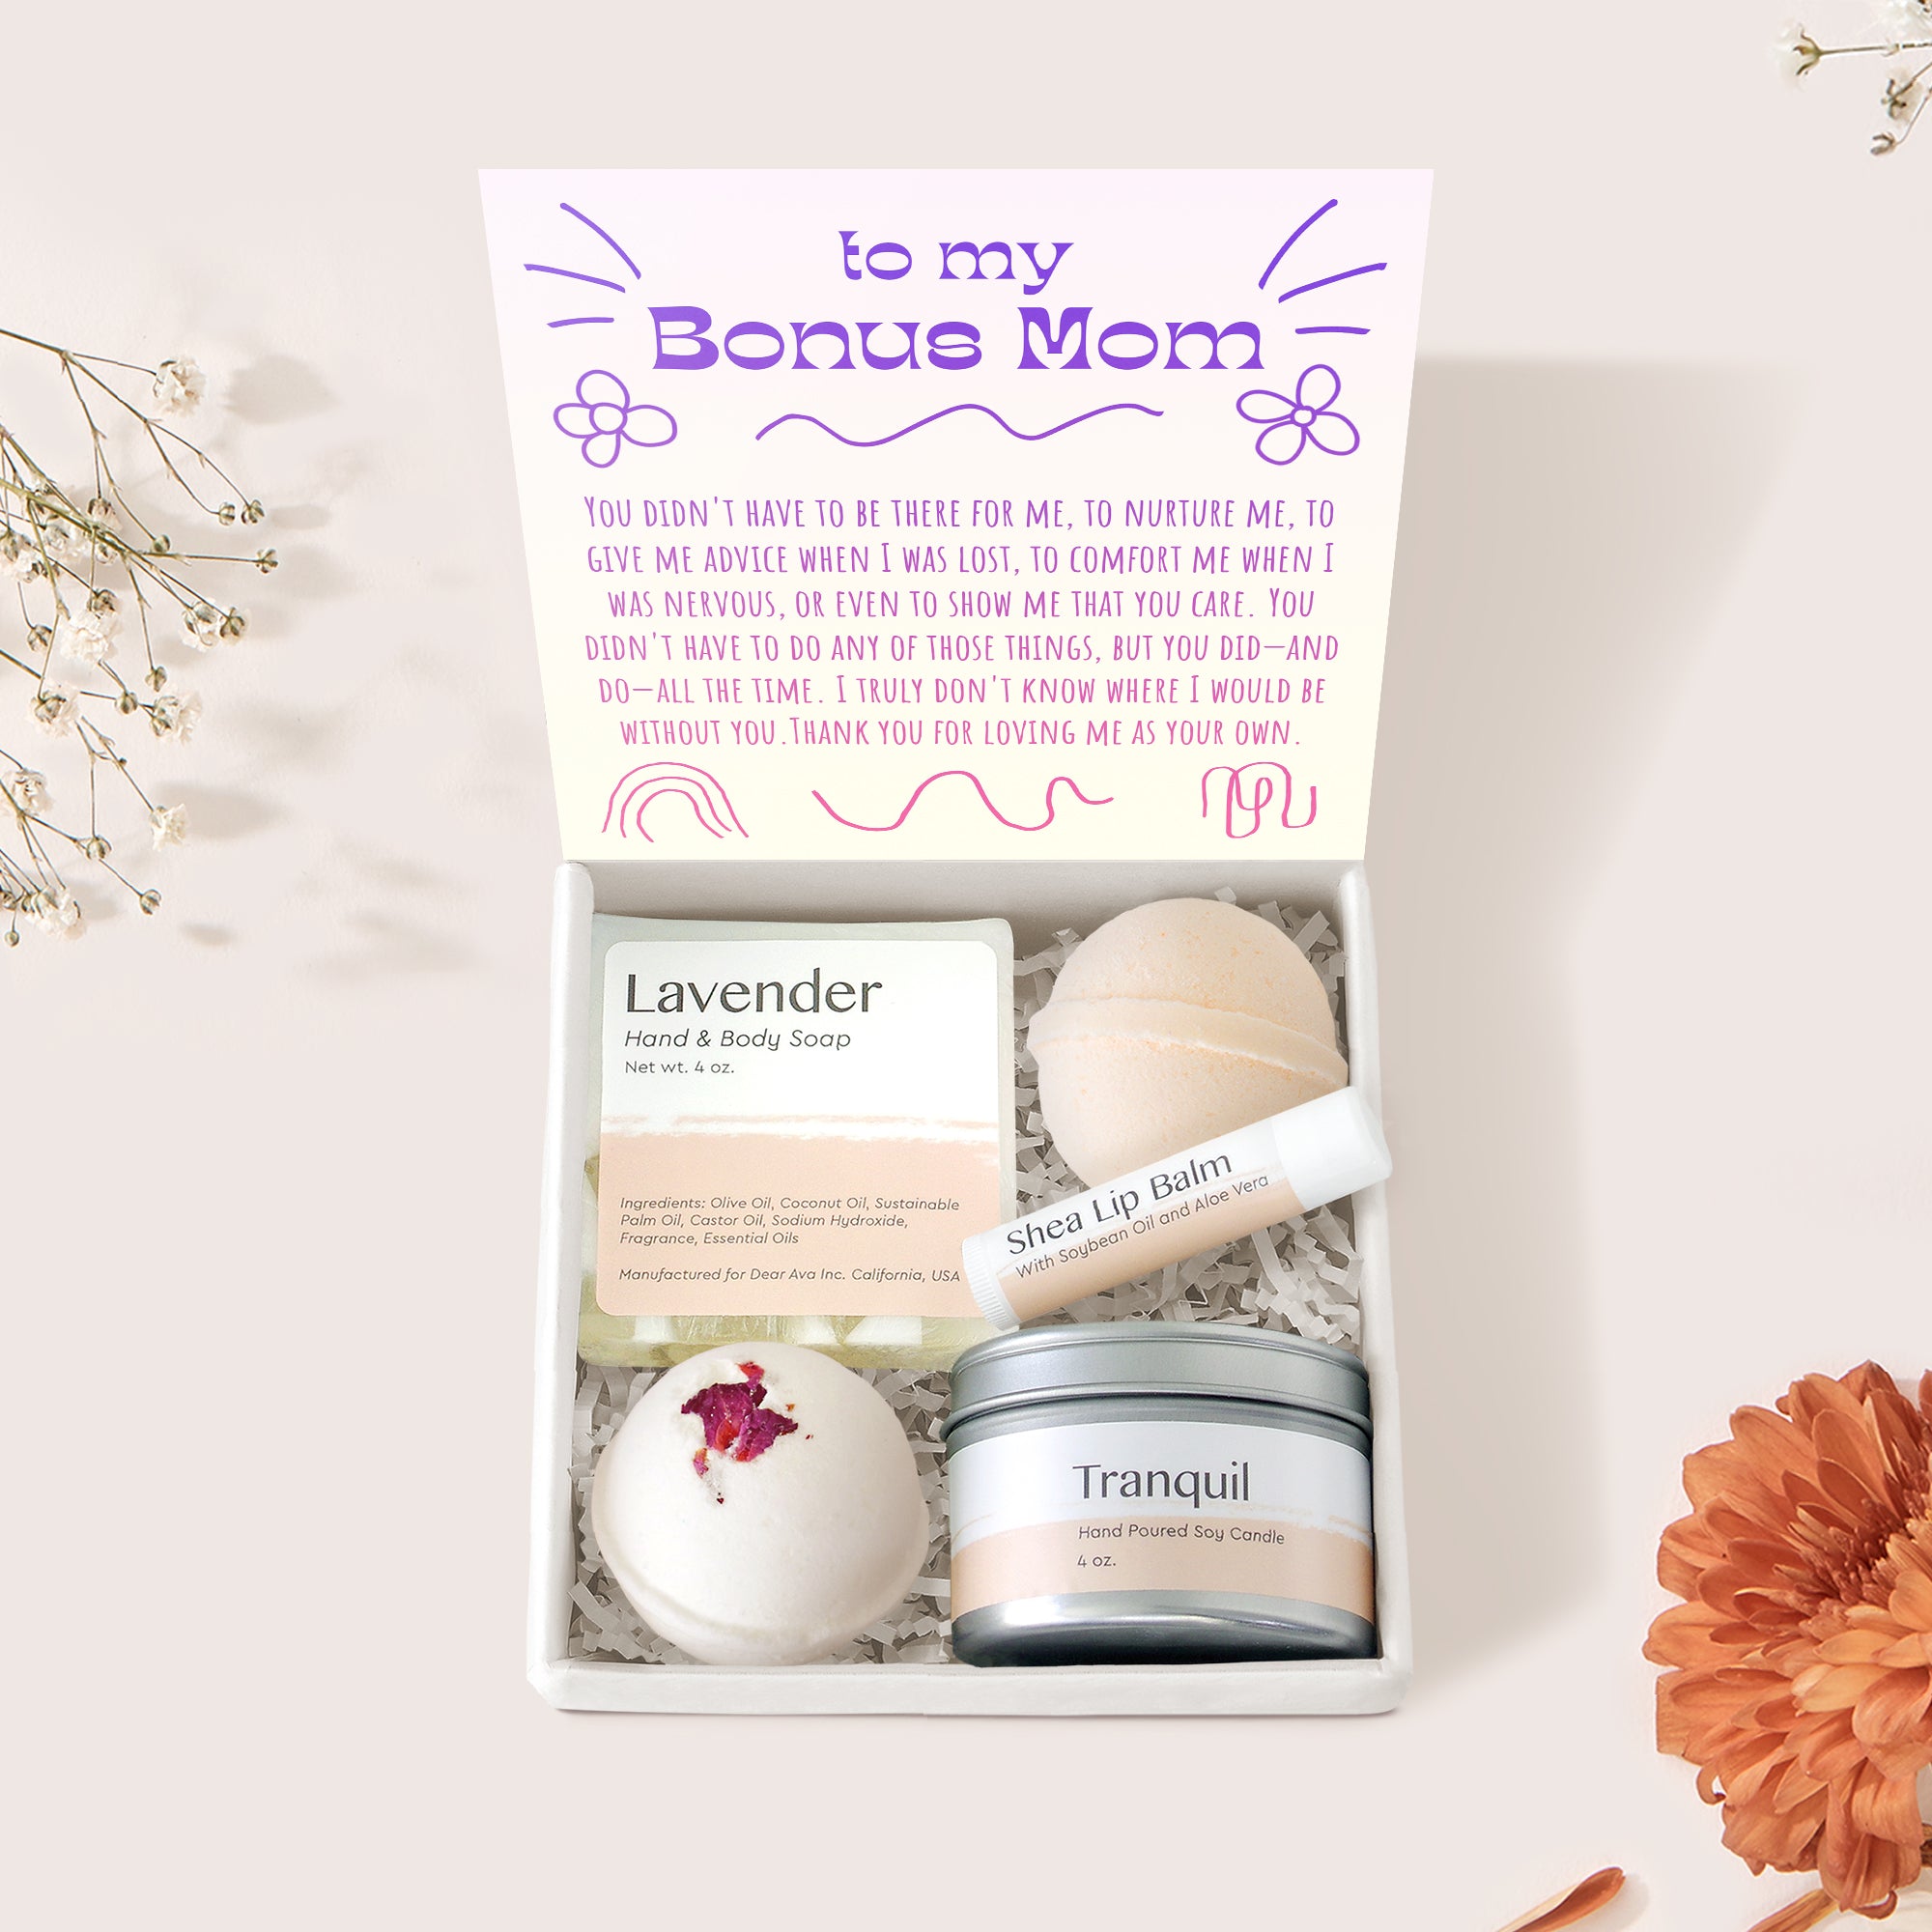  Christmas Bonus Mom Gifts from Daughter, Gifts for